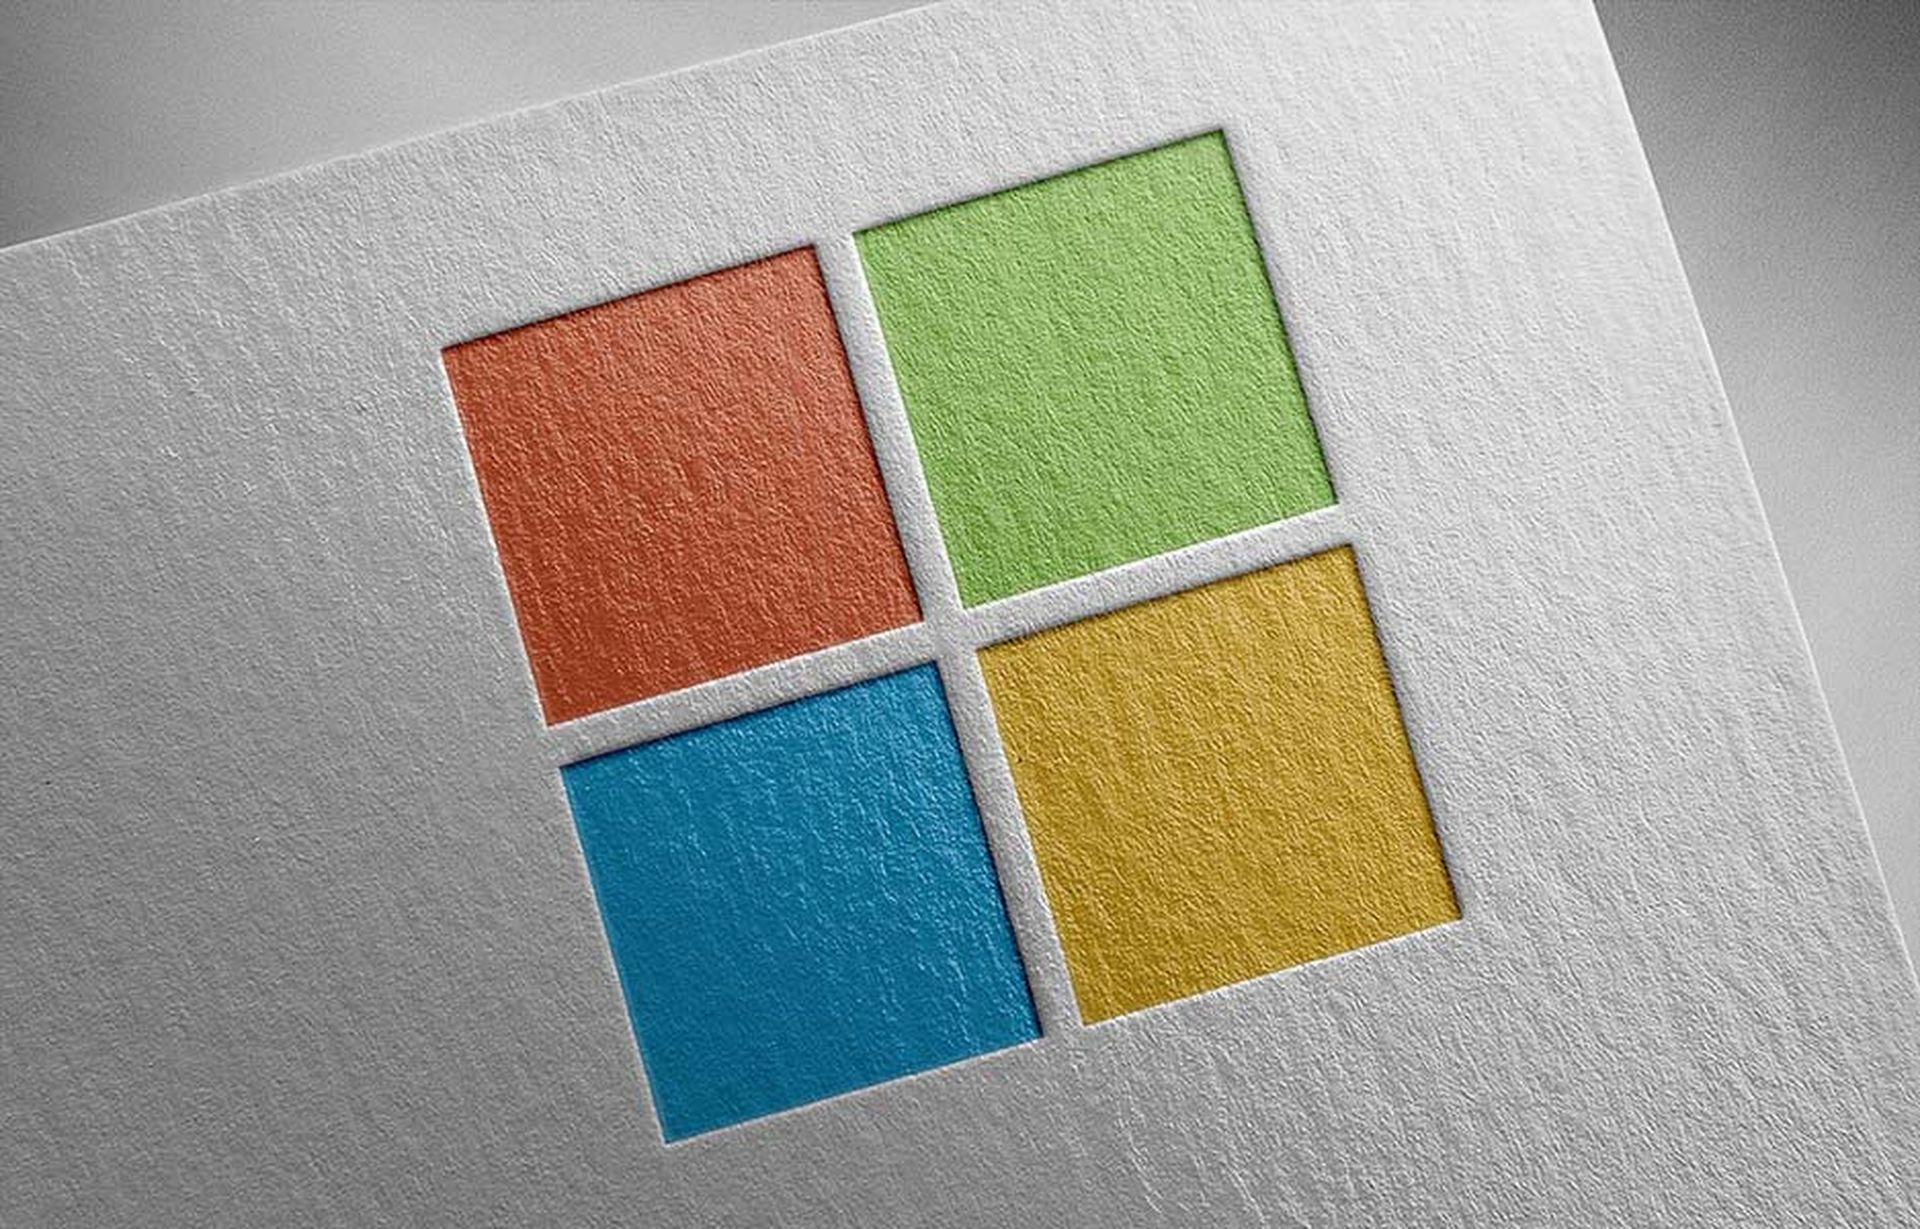 Microsoft March Patch Tuesday roundup